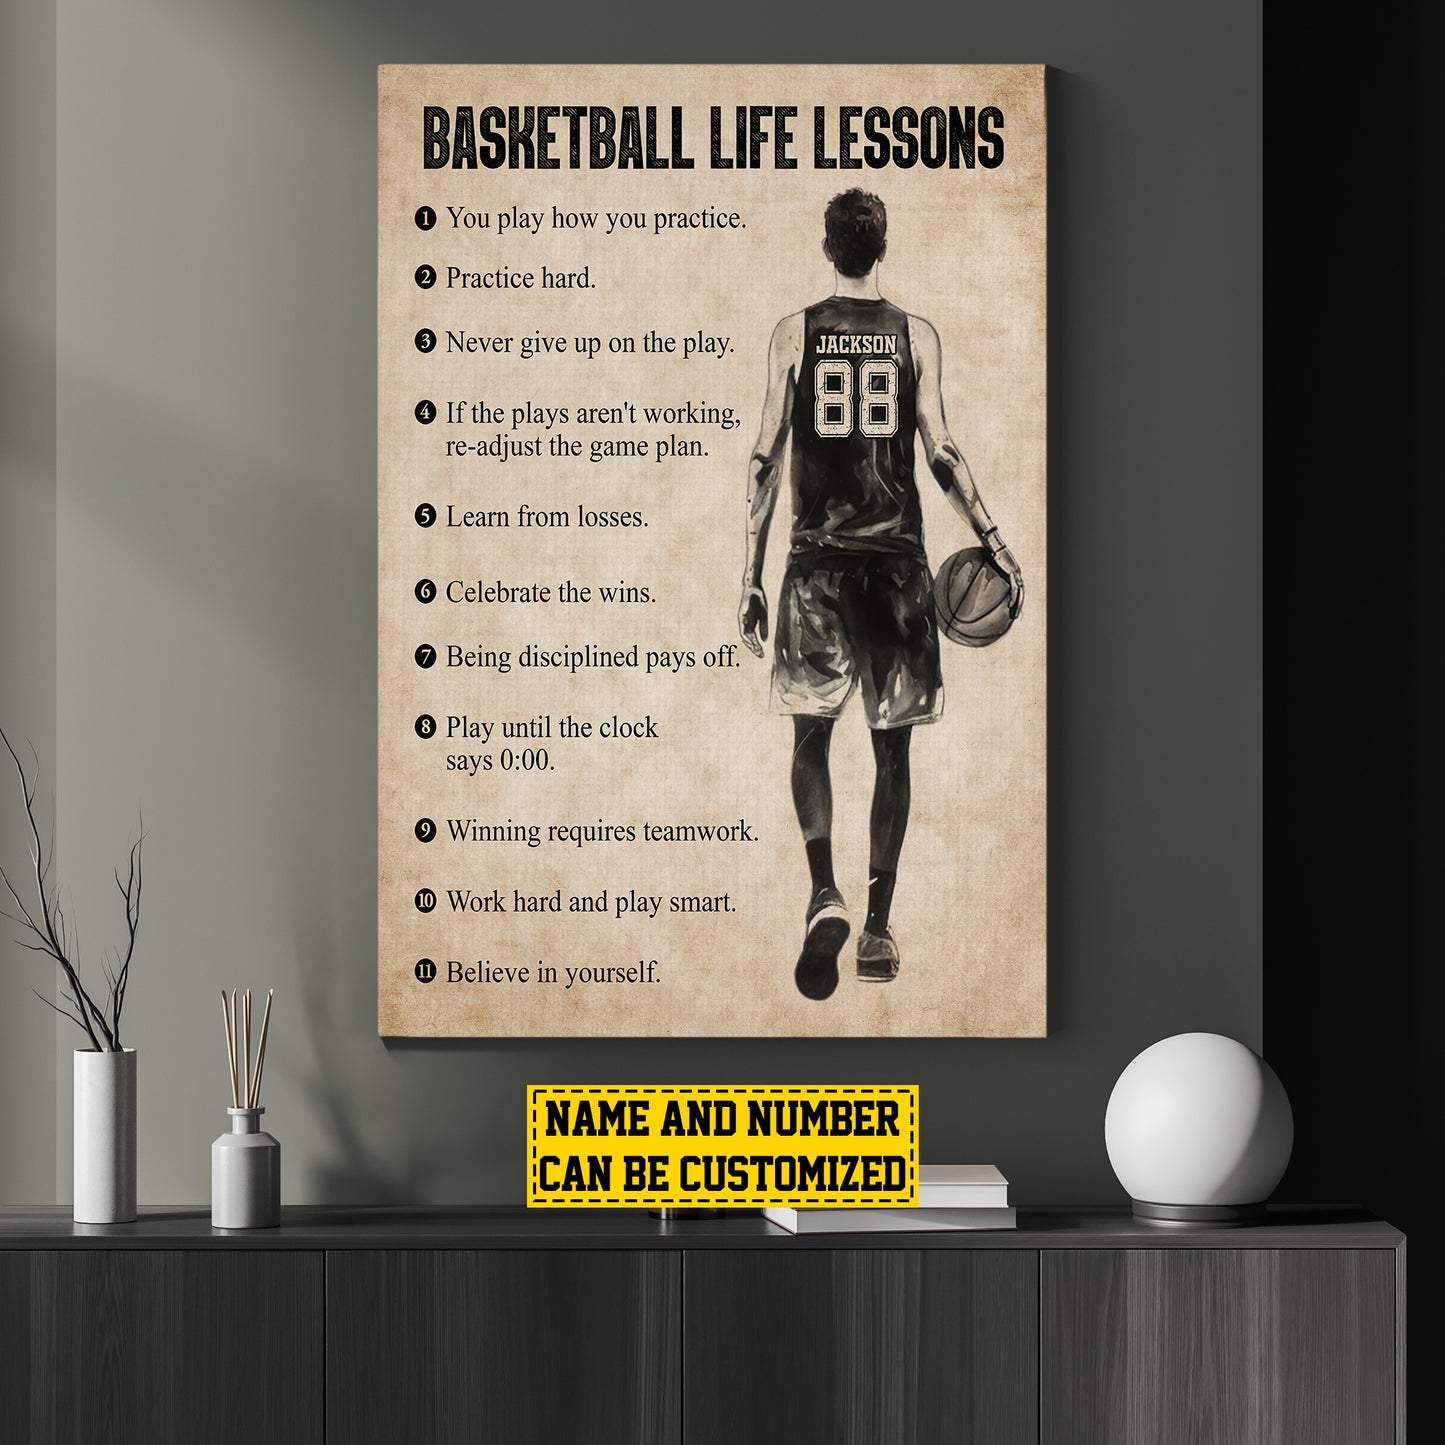 Personalized Basketball Boy Canvas Painting, Basketball Life Lessons, Inspirational Quotes Wall Art Decor, Poster Gift For Basketball Man Lovers